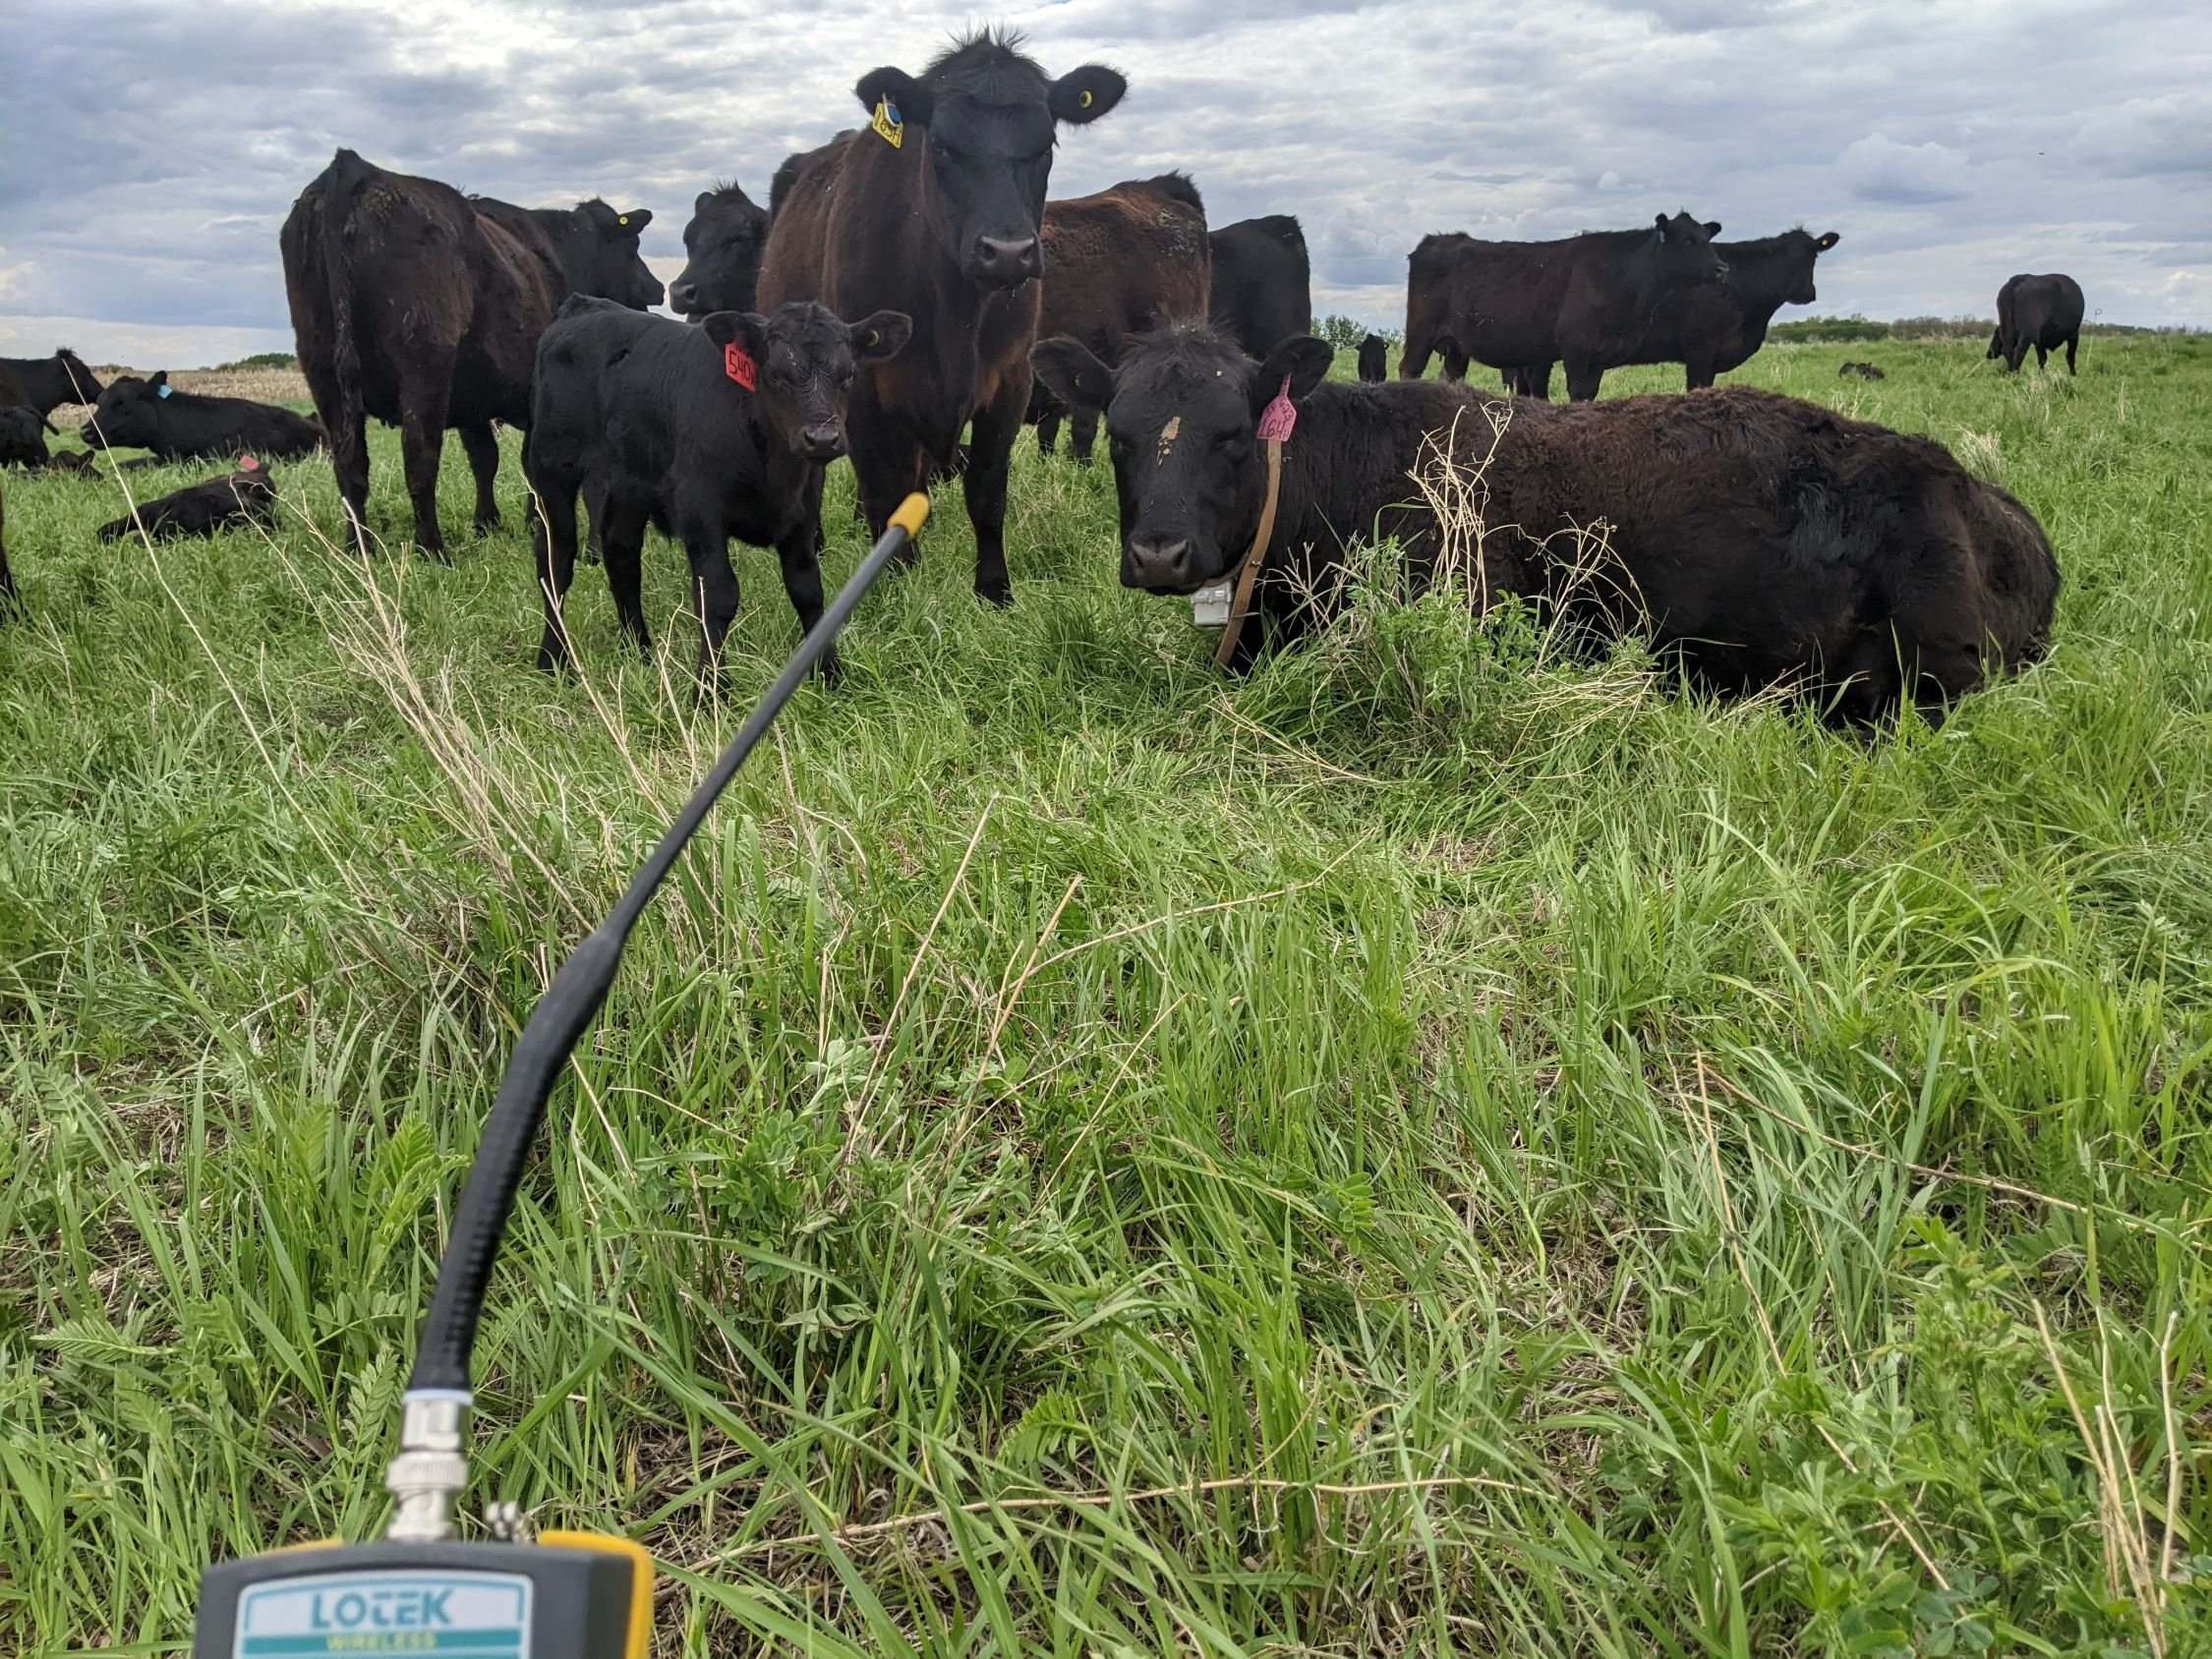 Dowloading information from GPS collars monitoring cattle locations